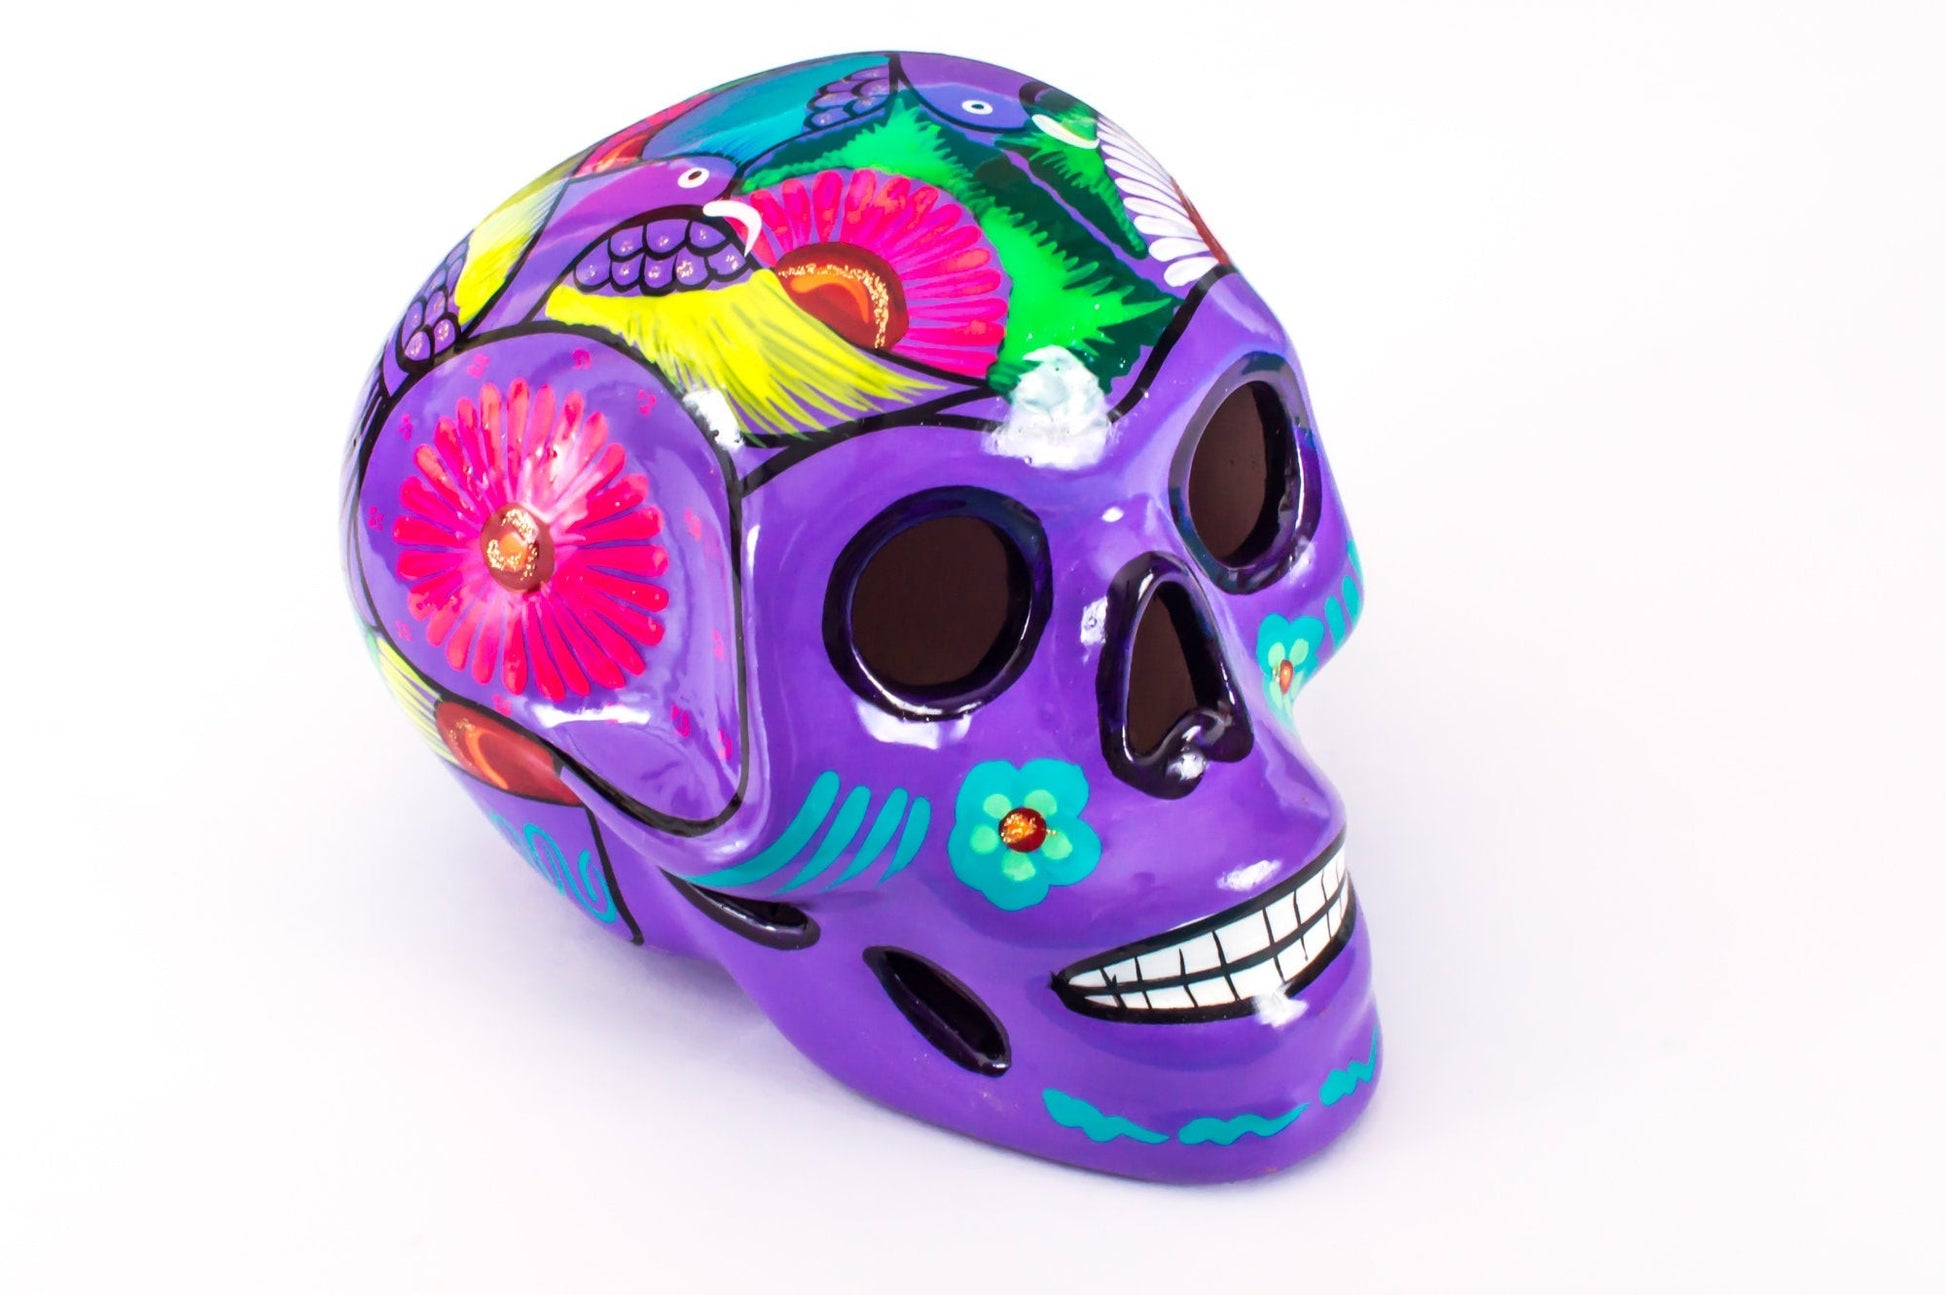 Large Ceramic Skulls Wholesale x 6 | Hand-painted With Love In Mexico By Traditional Huichol Artist - ARTMEXICO